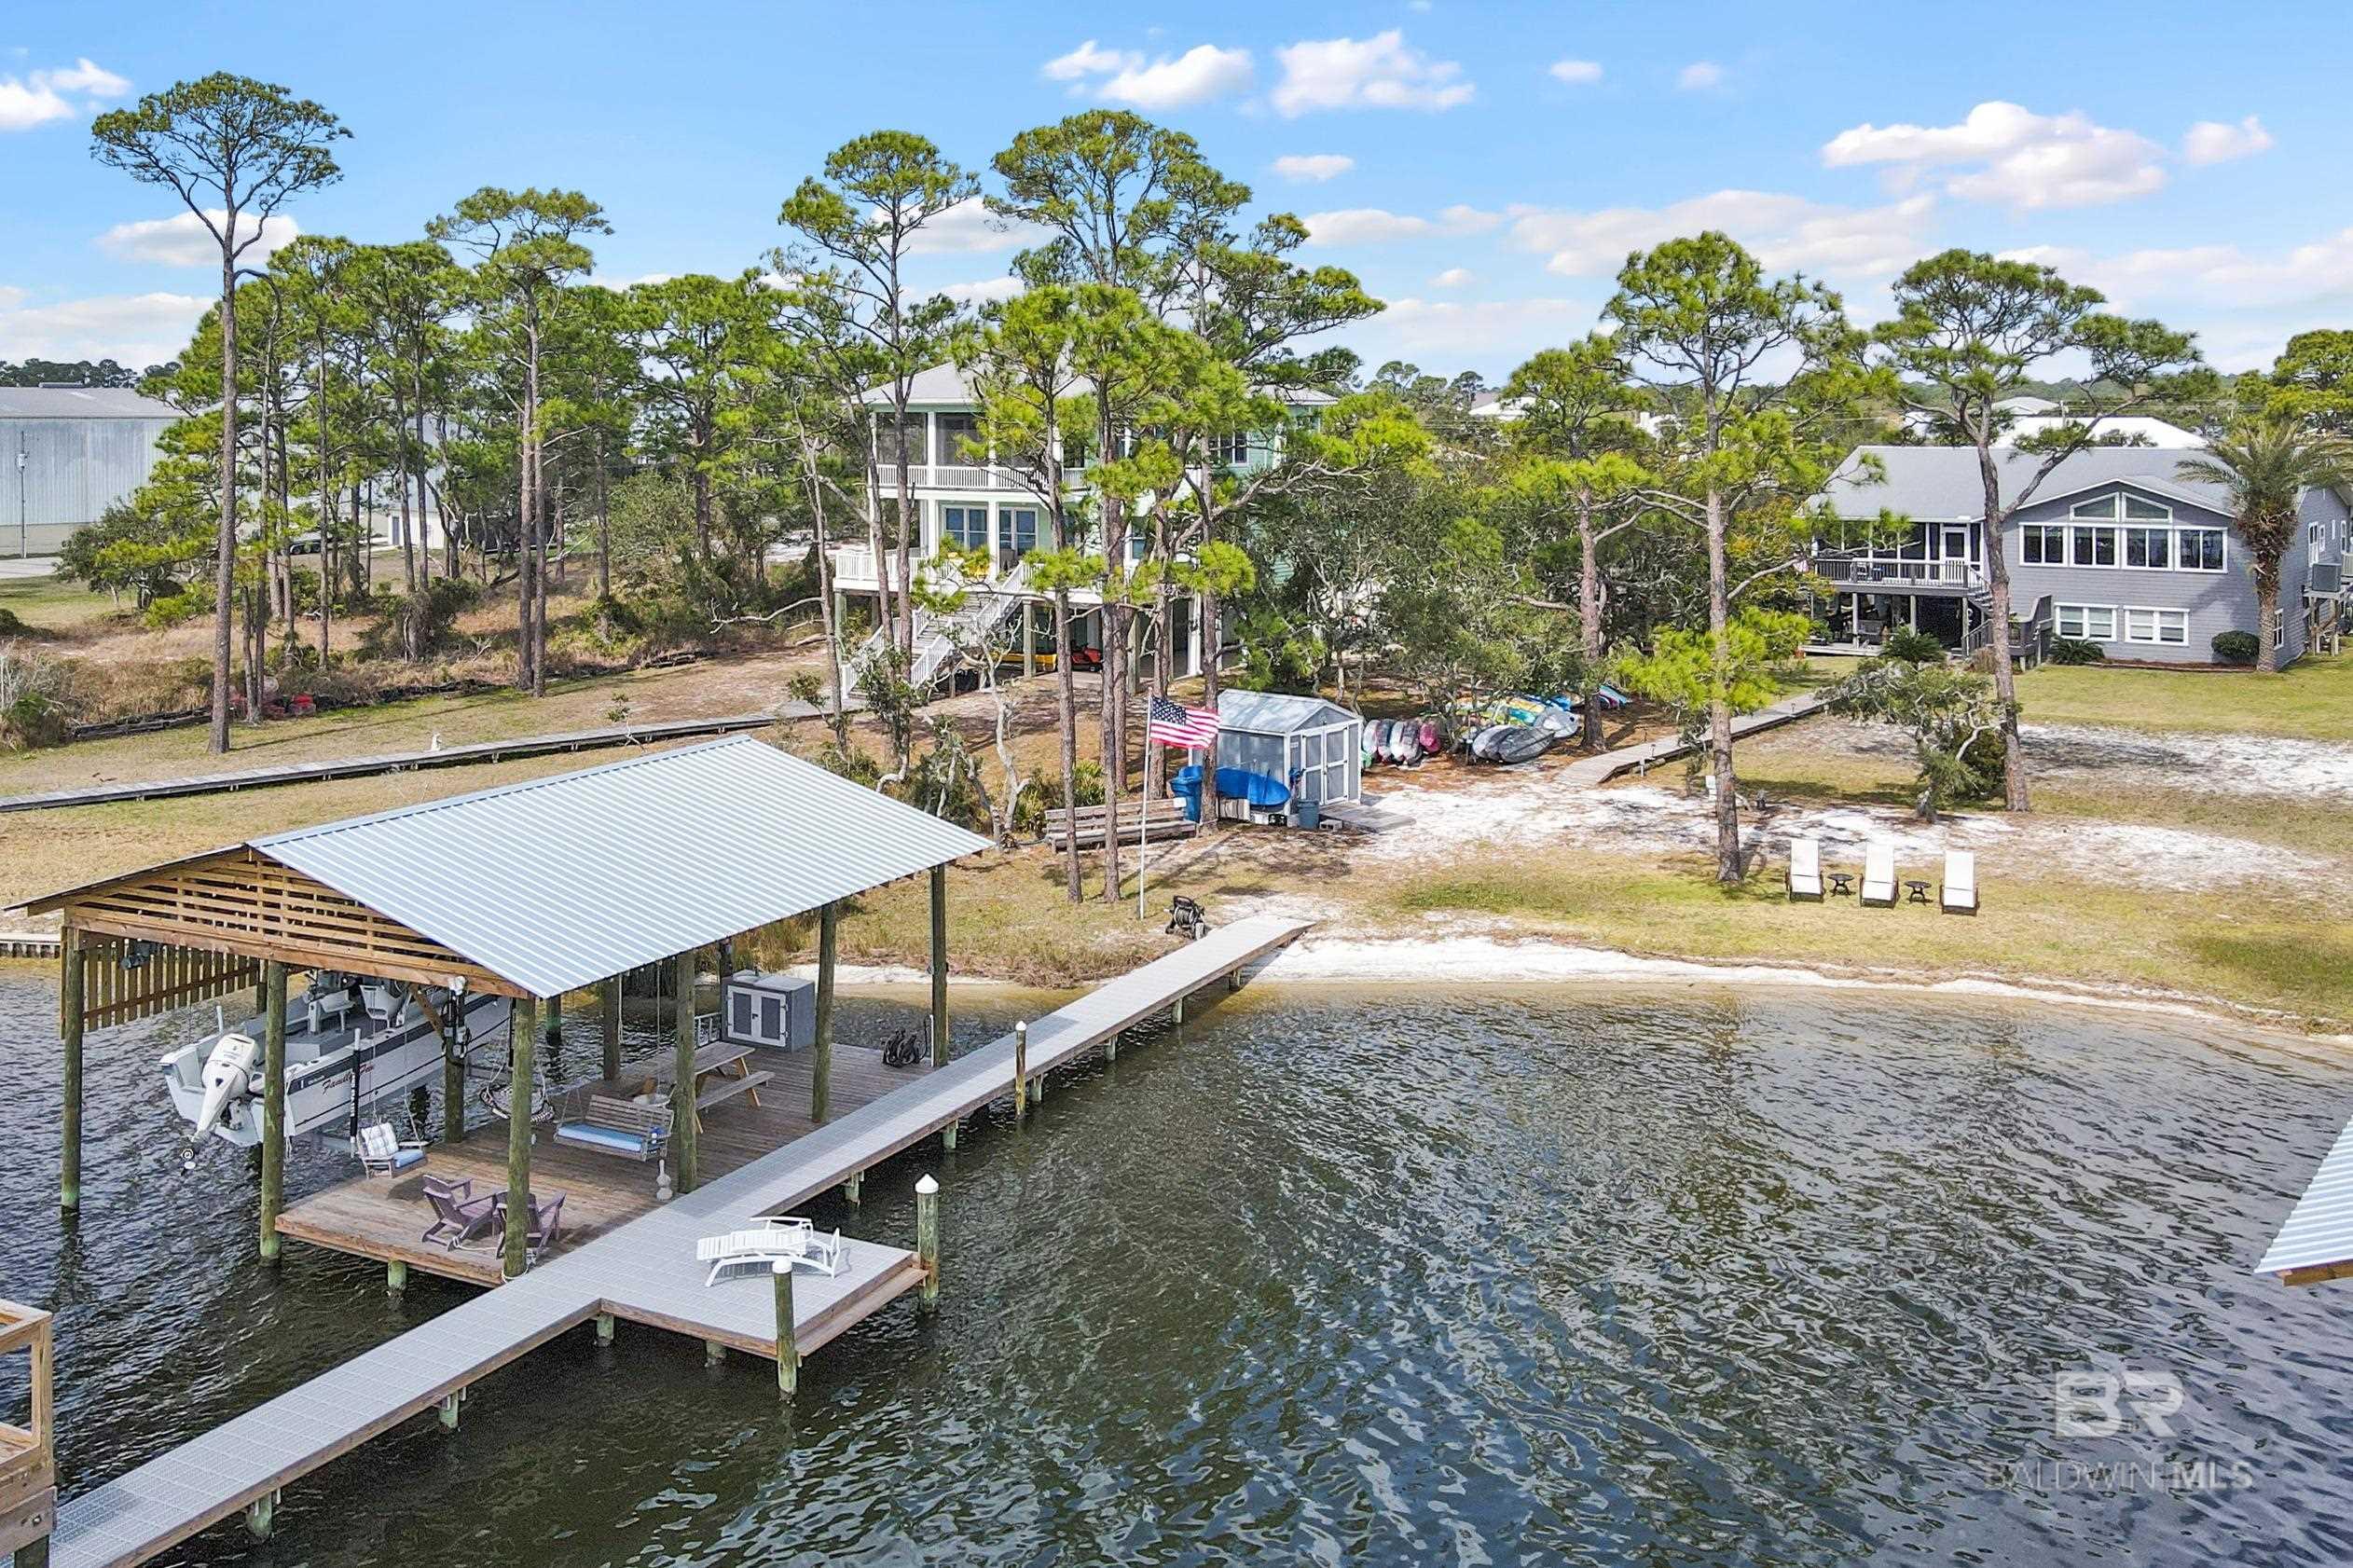 COTTON BAYOU WATERFRONT says it all...  This Unique and Rare find offers the absolute perfect waterfront home, whether for retirement, vacation, or year around living. This 4 bedroom and 4 and 1/2 bath home had a major renovation completed in 2004 and a whole house update completed in 2021. (Check out the property photos). The panoramic views of Cotton Bayou are seen from most rooms and levels of this beautiful home. The main level offers a huge Great room with vaulted ceilings, picturesque windows, and big views as does the main bedroom. The main bedroom is very spacious and has two walk-in closets and two private baths. Other features included in this open floor plan is a fully equipped kitchen, woodburning fireplace, additional living room space along with two guest bedrooms and the 3rd bath. The first-floor level offers a large Den/Recreational room perfect for that pool table you been wanting or just a great gathering spot from a day on the water. This level also has a guest suite with full bath and a large office space. Other property features include: board walk down to your private boat dock, two boat houses with power lifts, covered decks, sun decks, and your own little sandy beach. This property also has plenty of parking along with a double garage as well as a second detached double garage for the toys. One of the very best features of this beautiful property is the location at which you are to Perdido Pass into the Gulf of Mexico as well as all the other water ways abundant to the Orange Beach communities. I could go on and on but the best thing to do at this point is to contact your Real Estate Agent and to make arrangements for your personal private showing.